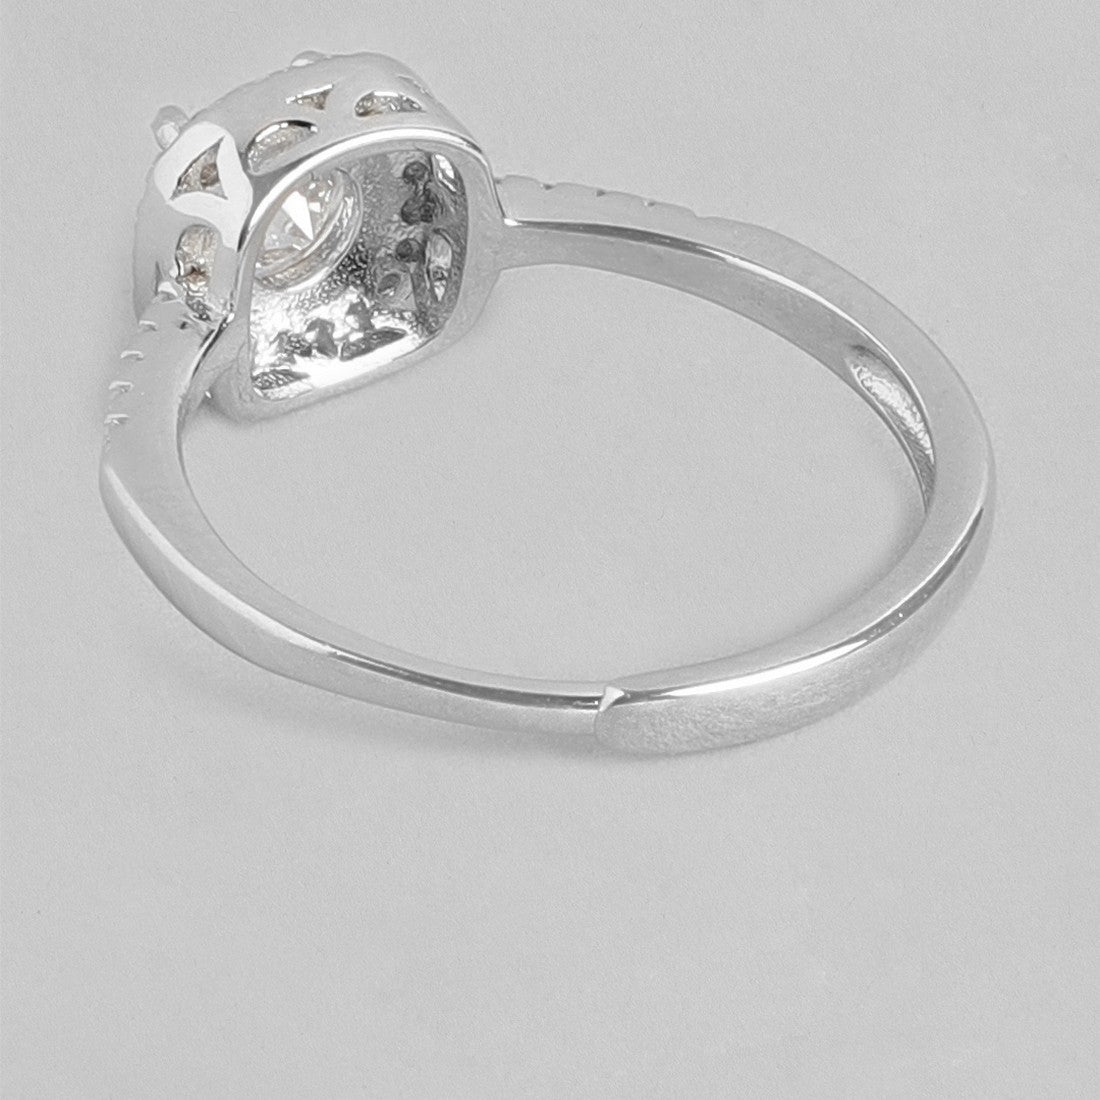 Date Night Staple Solitaire 925 Silver Ring(Adjustable)